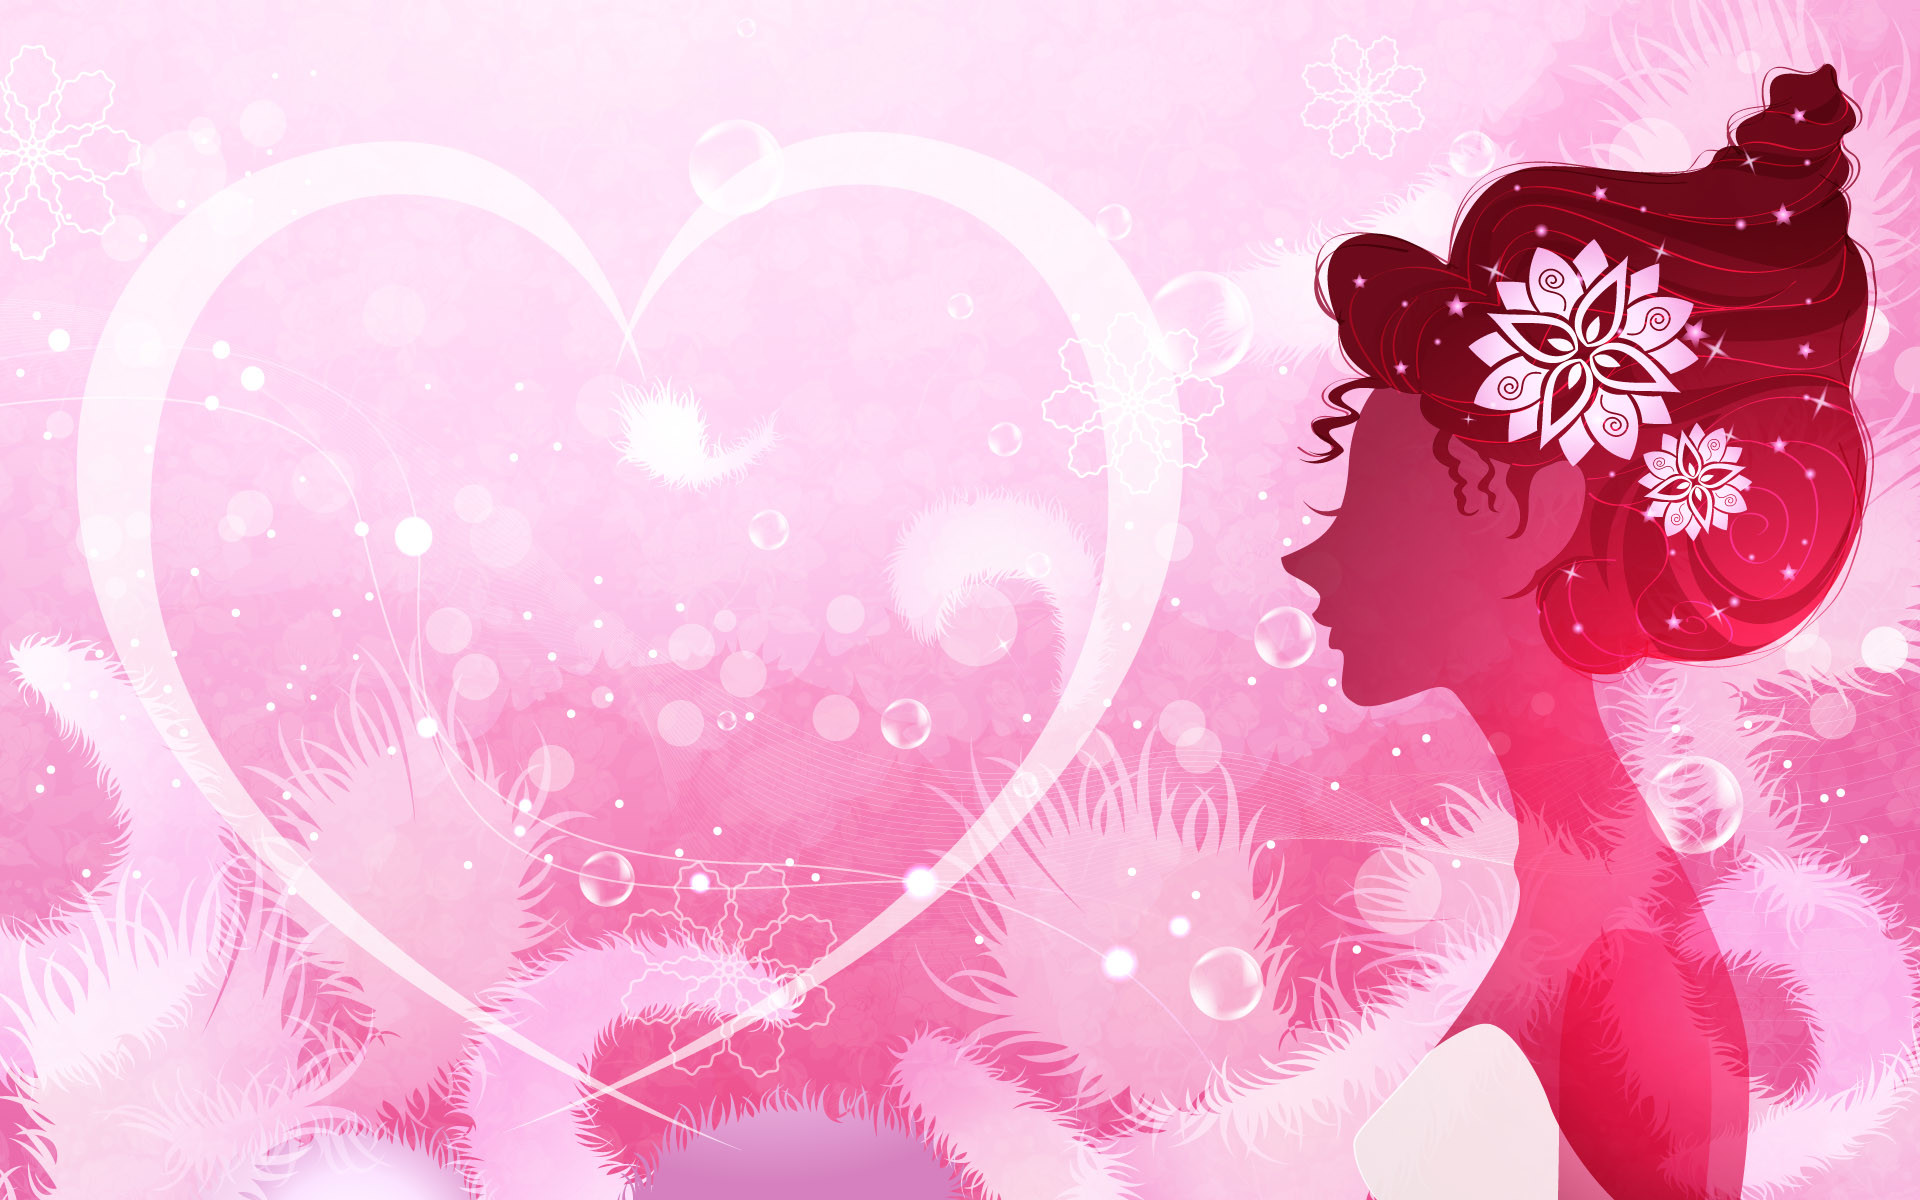 Cute Pink  Girly Chat backgrounds  Wallpapers  by Narendra doriya